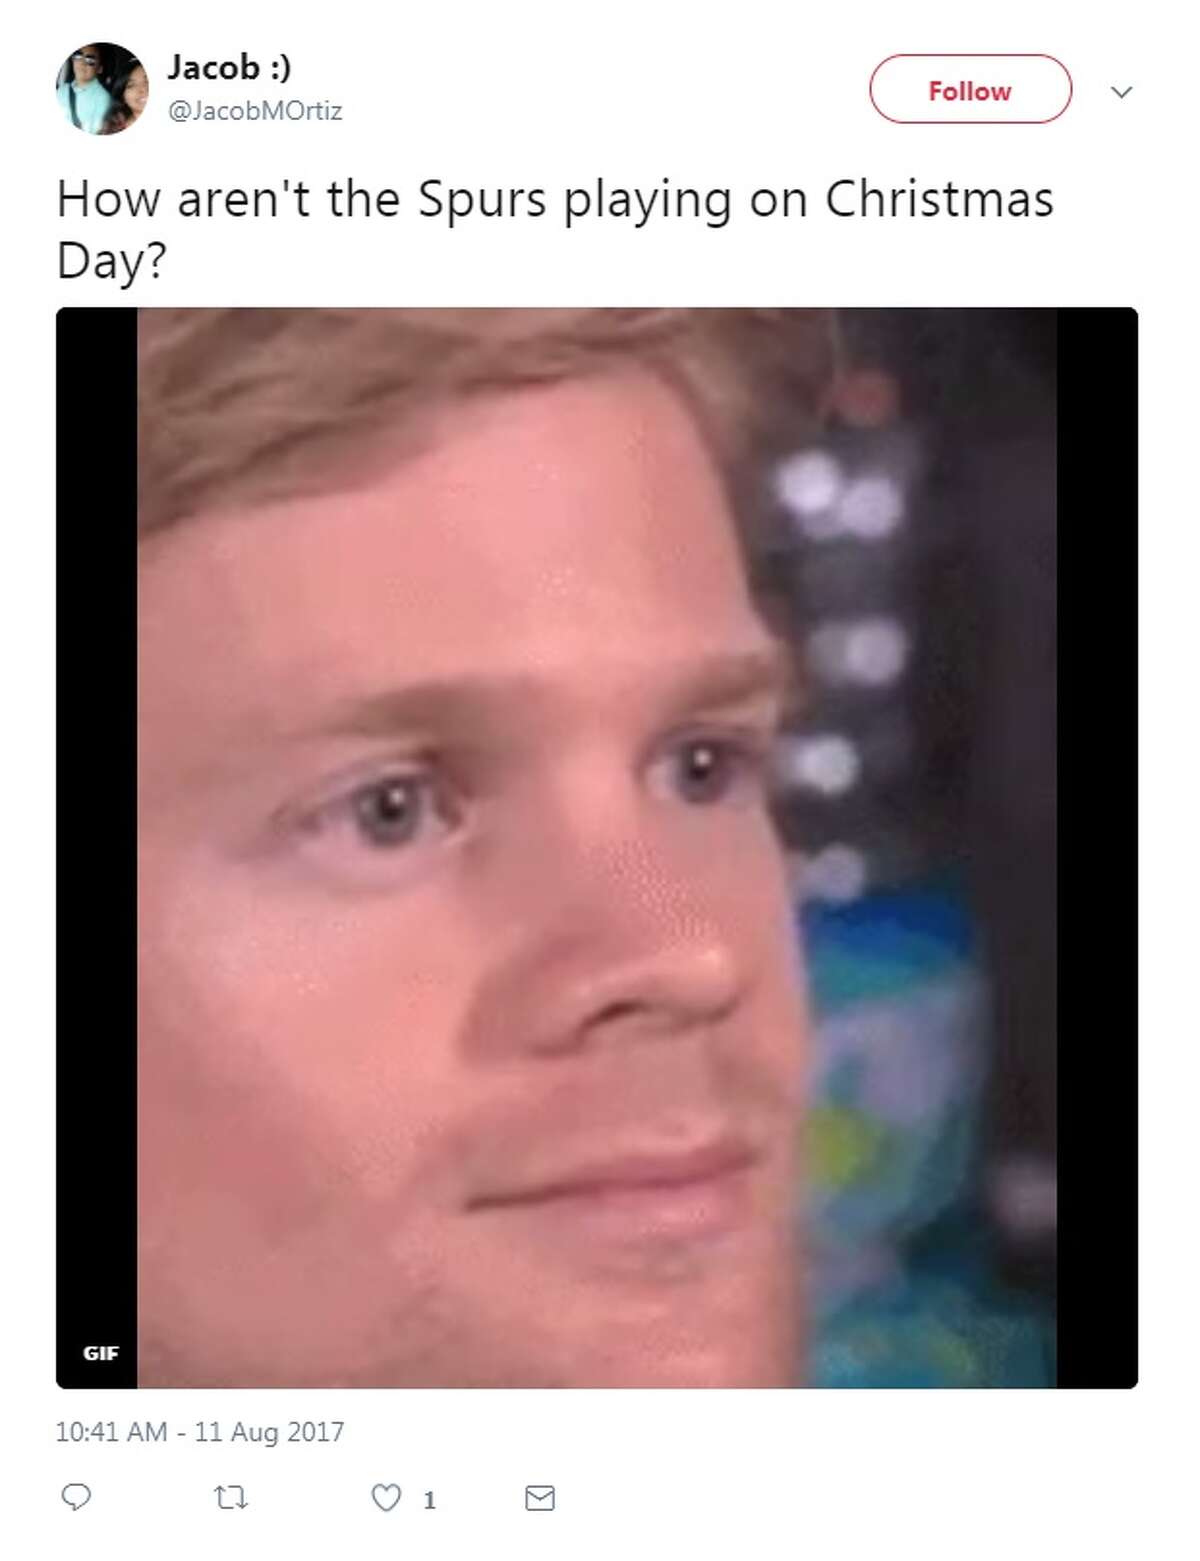 @JacobMOrtiz: "How aren't the Spurs playing on Christmas Day?"